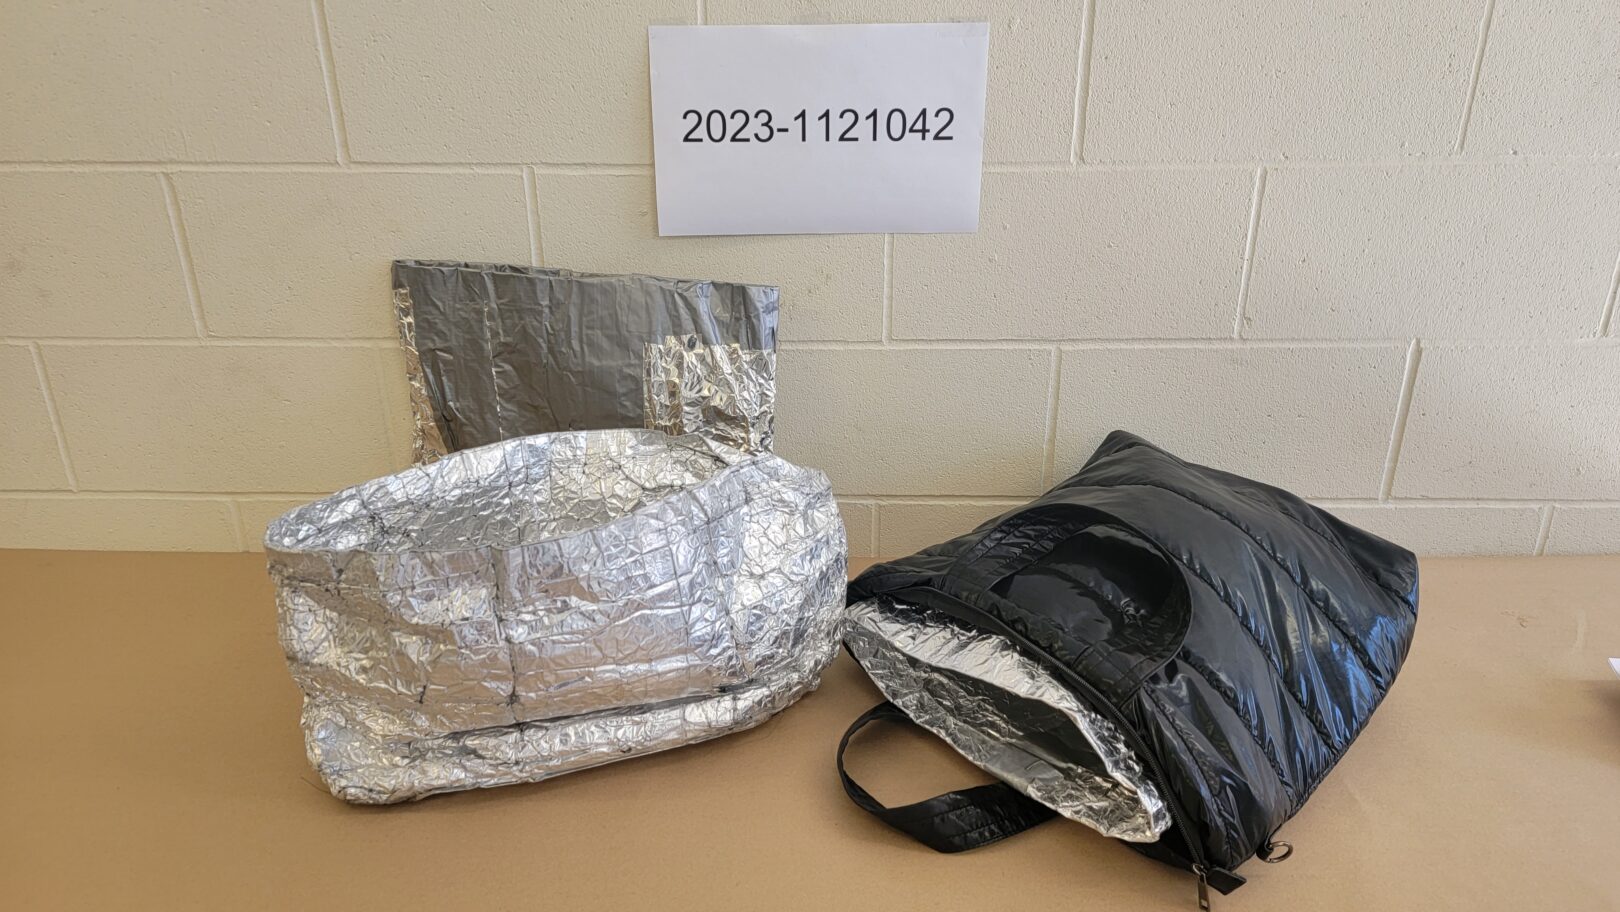 Handmade tinfoil bags used to steal and hide stolen items